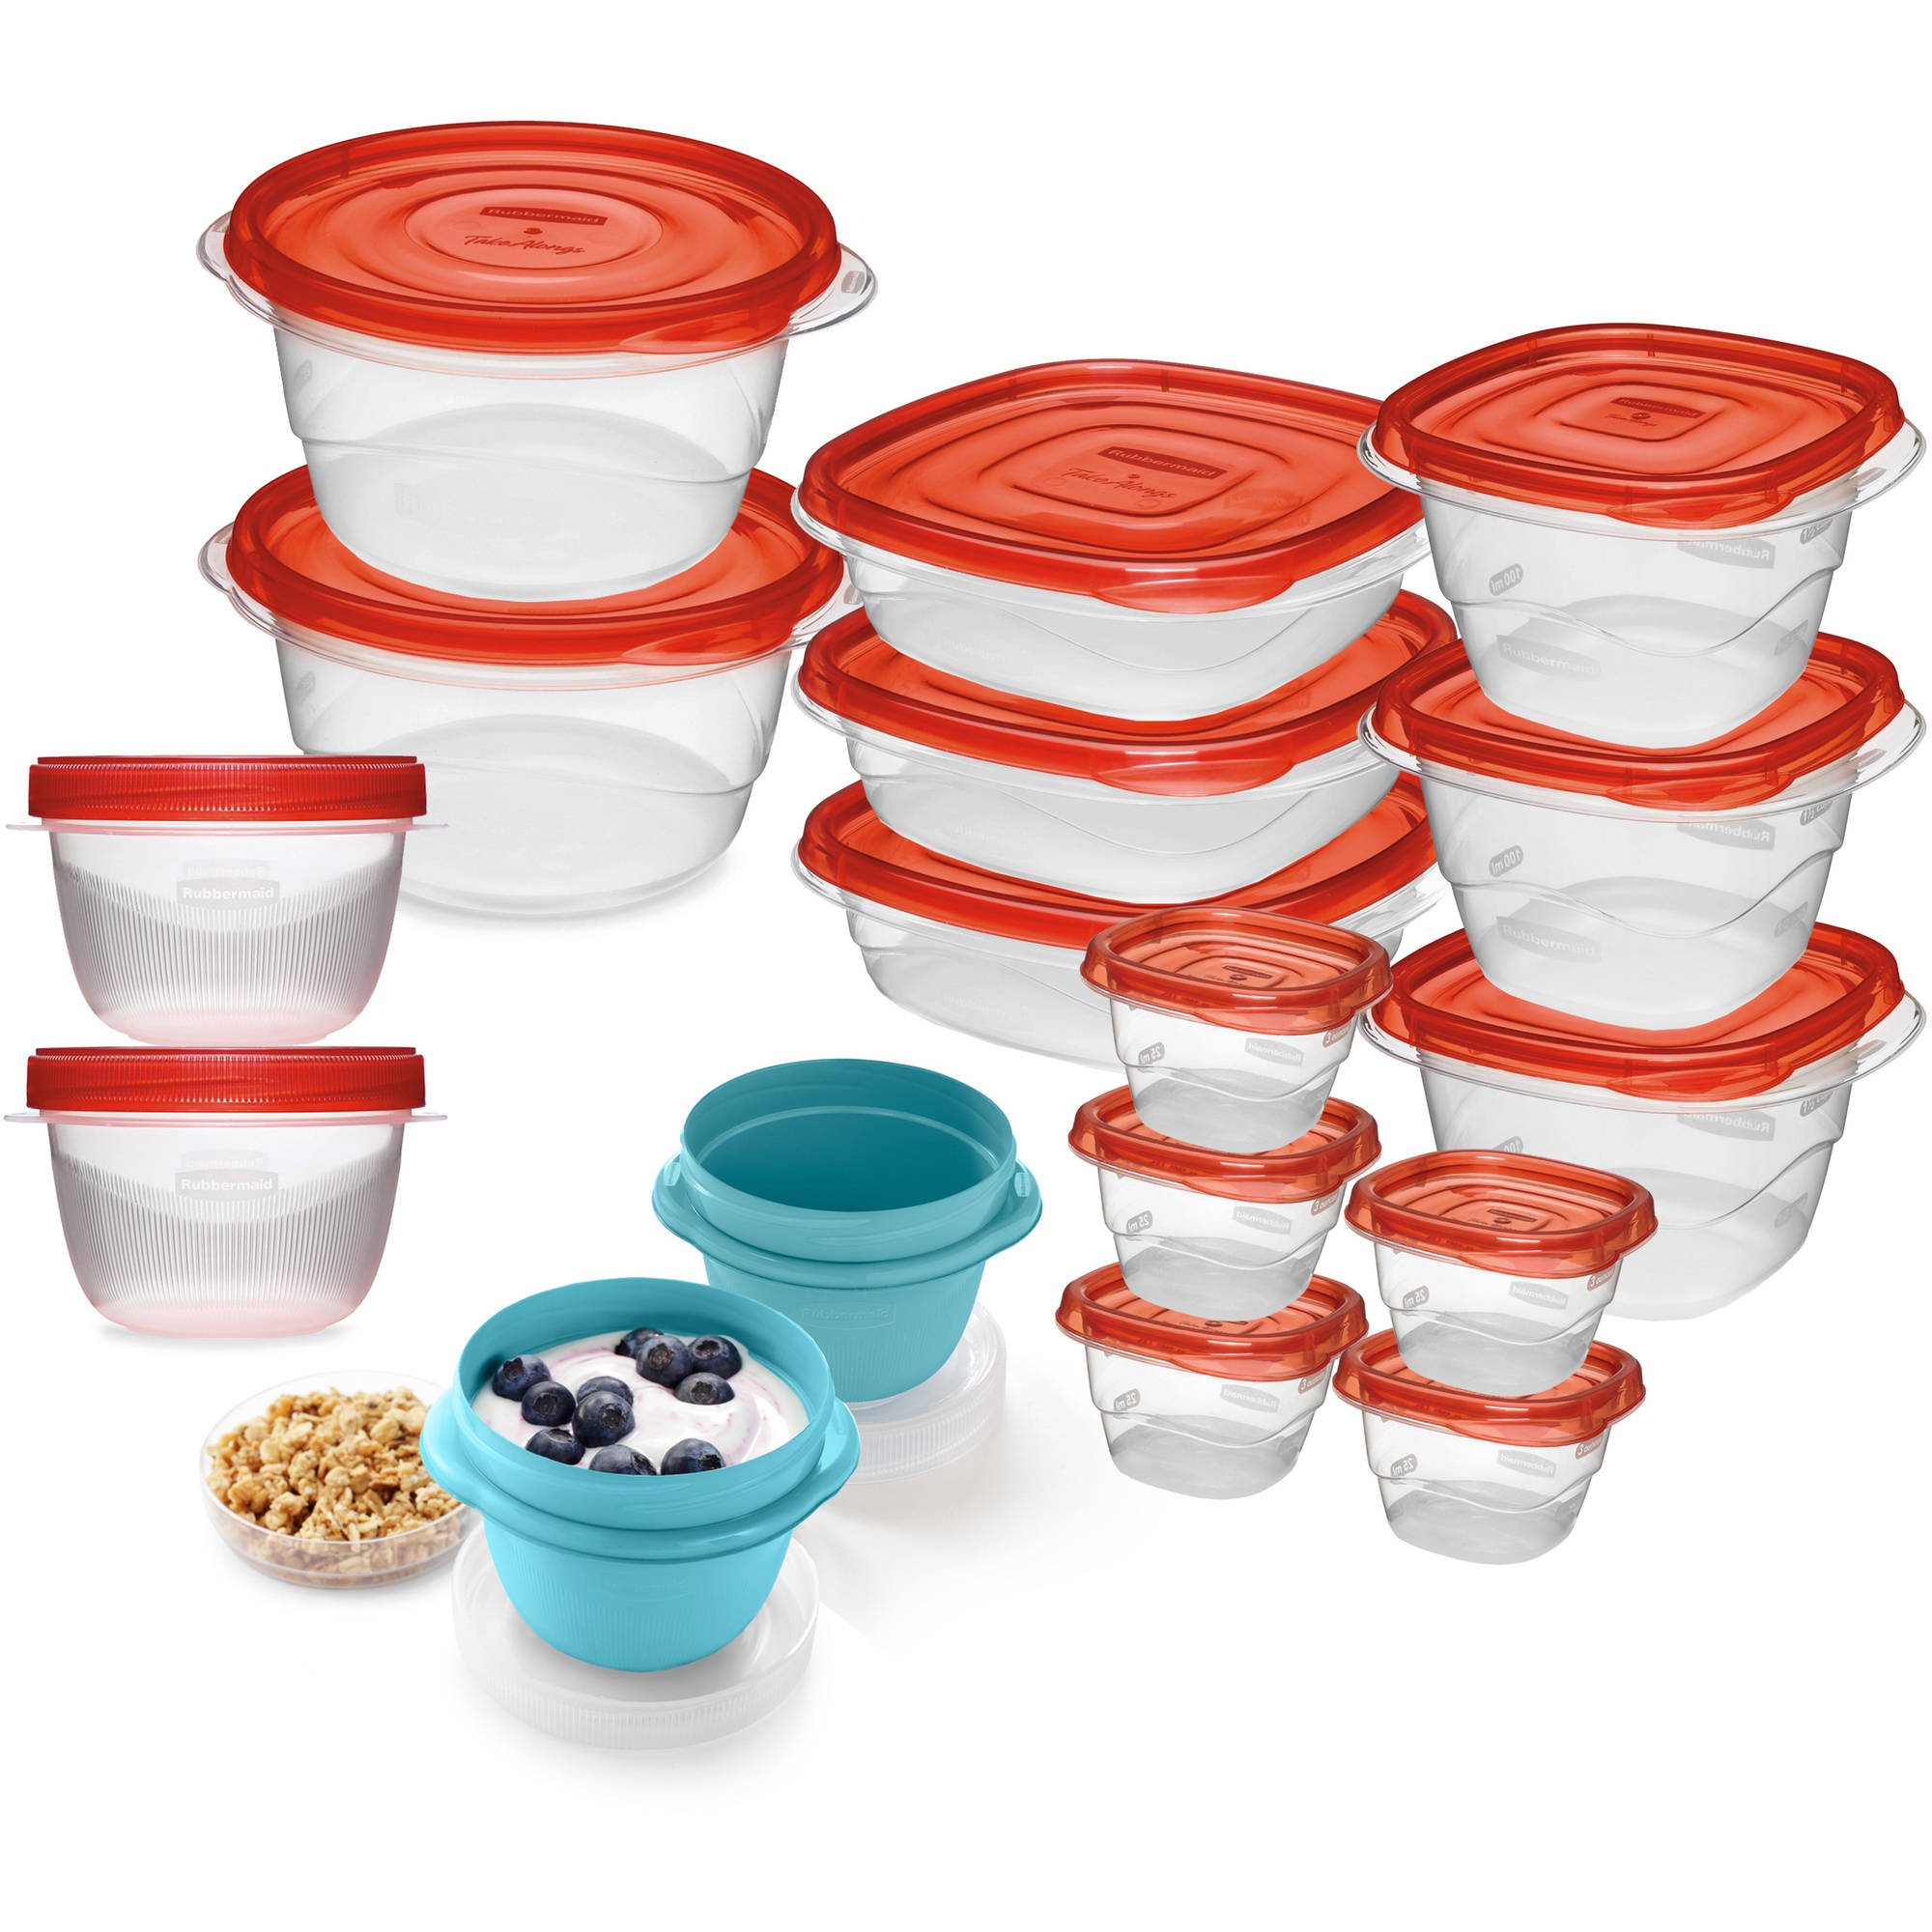 Rubbermaid TakeAlongs Food Storage Container, 36-Piece Set, Red - image 1 of 8